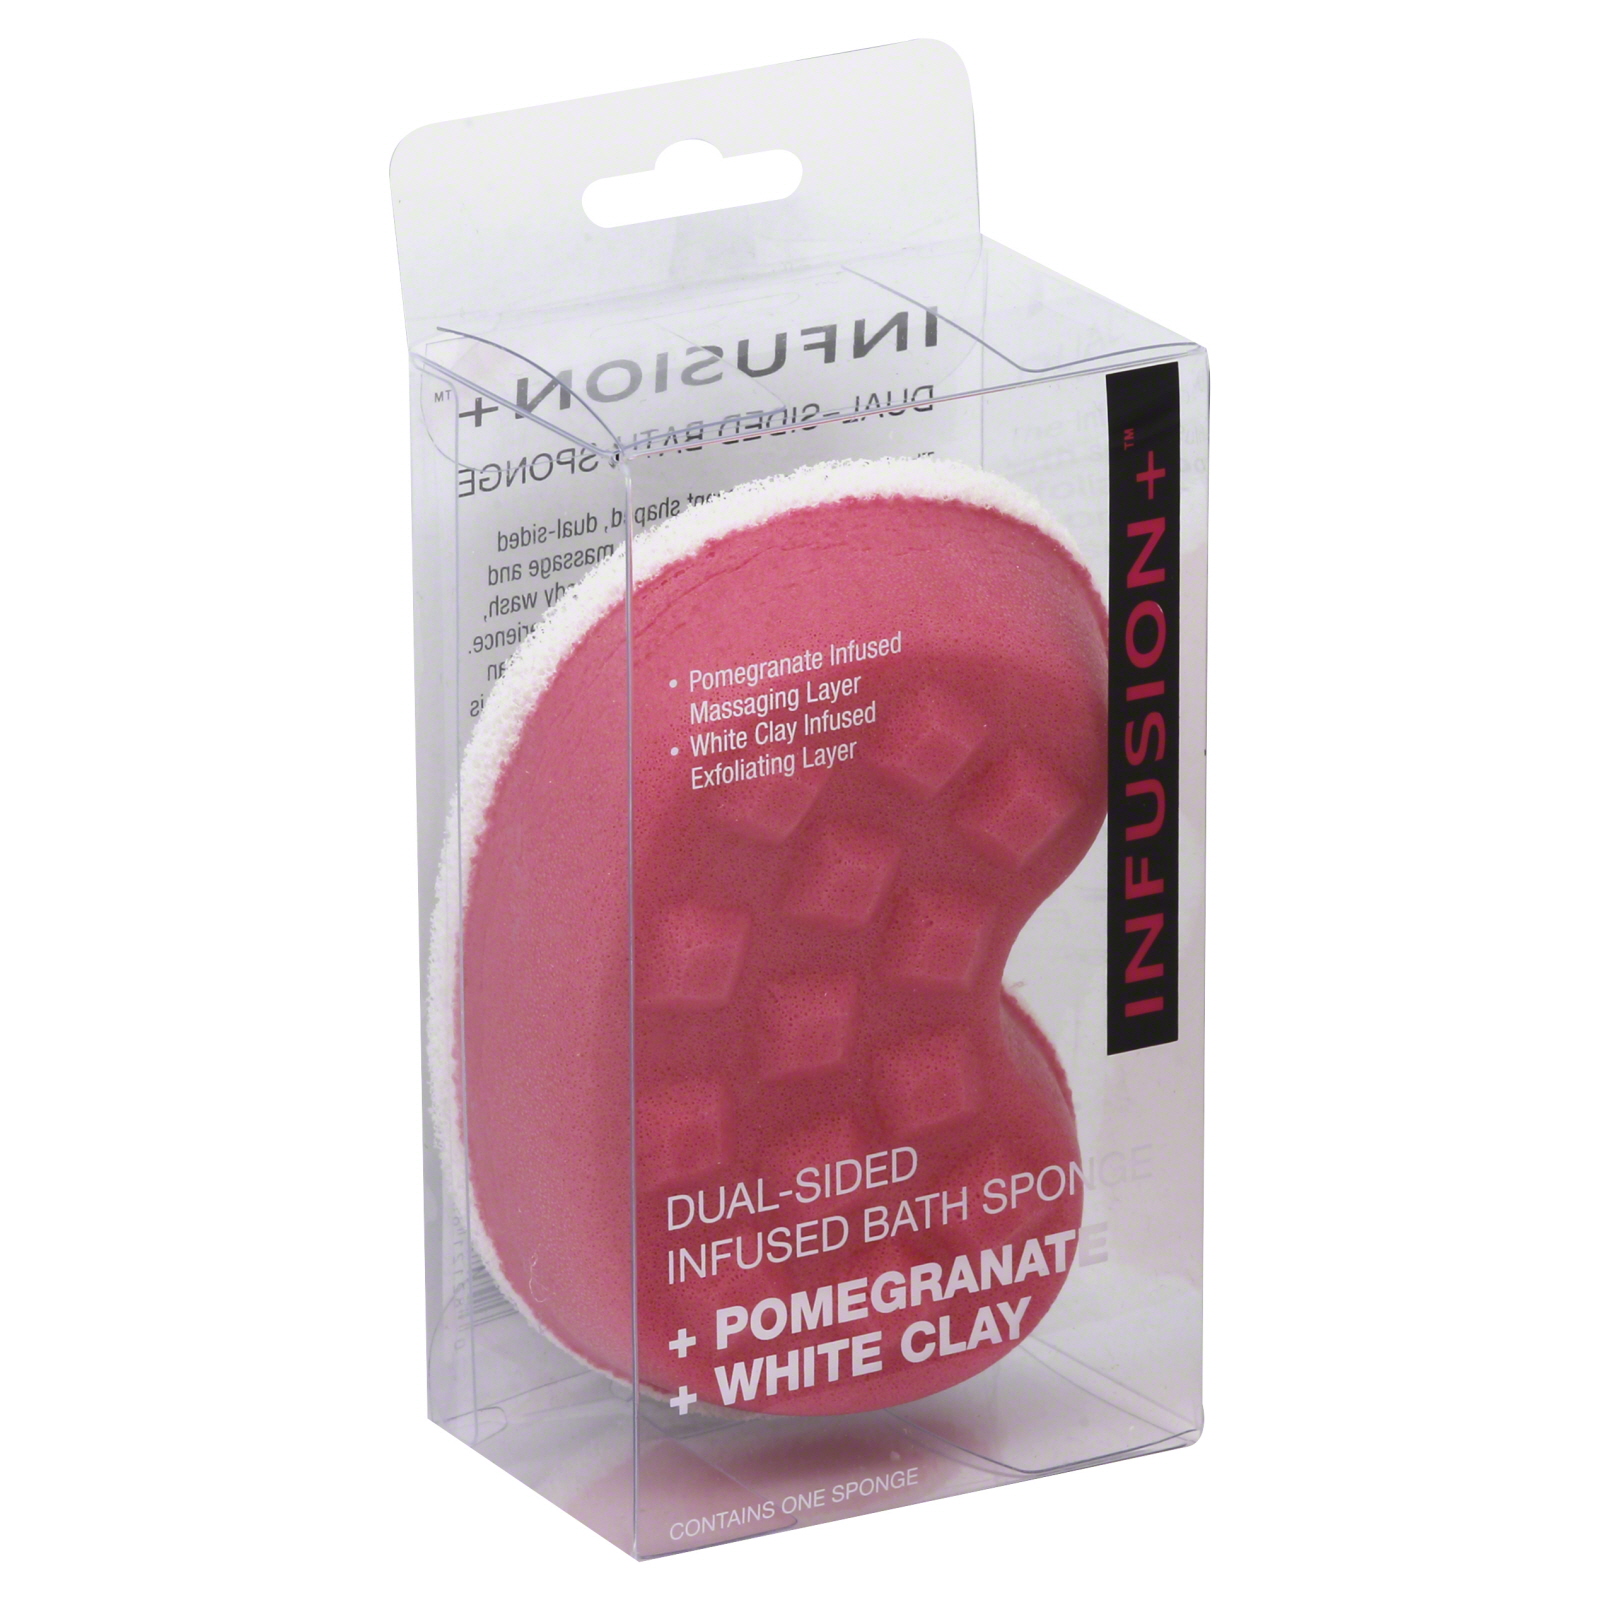 Diversified Bath Sponge Dual Sided Infused Pomegranate White Clay